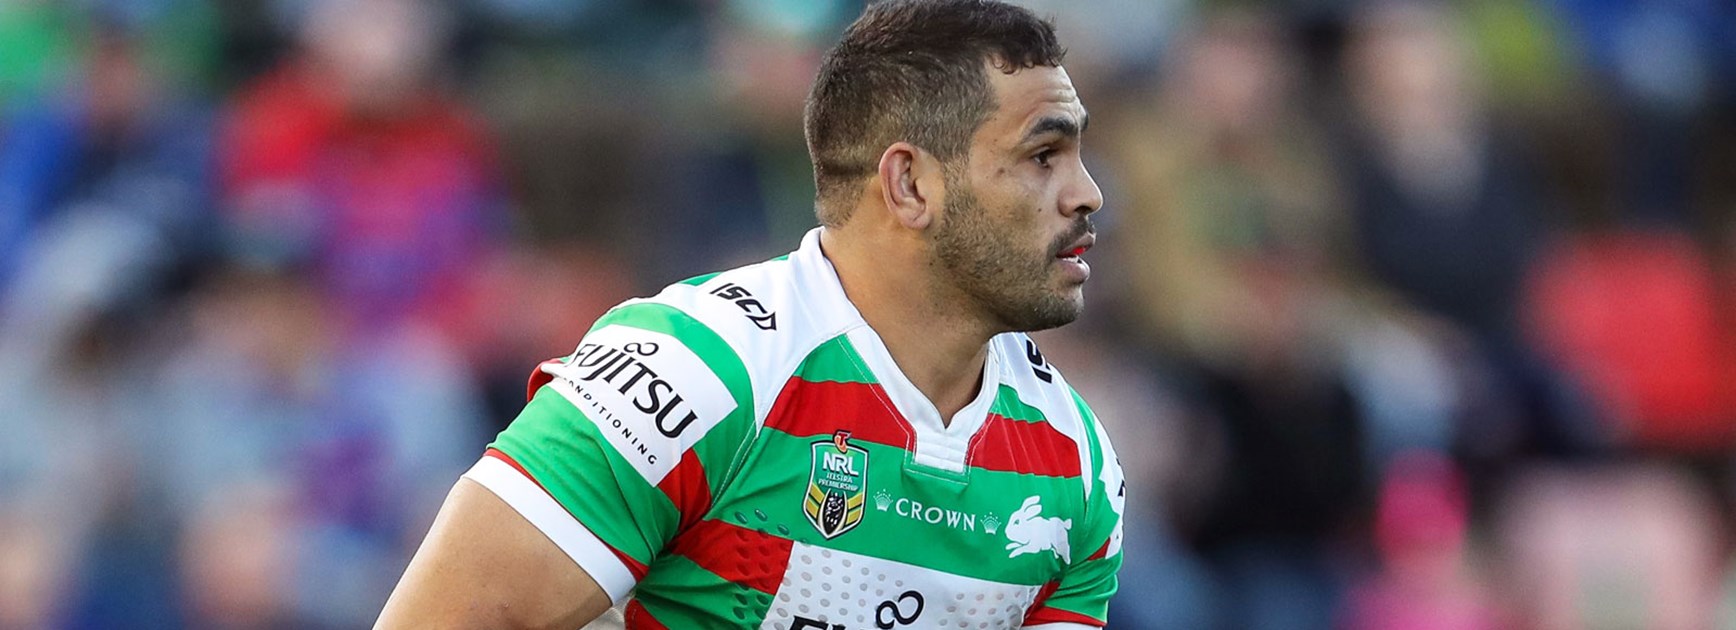 Souths captain Greg Inglis is fit and ready to face the Bulldogs in Round 26.